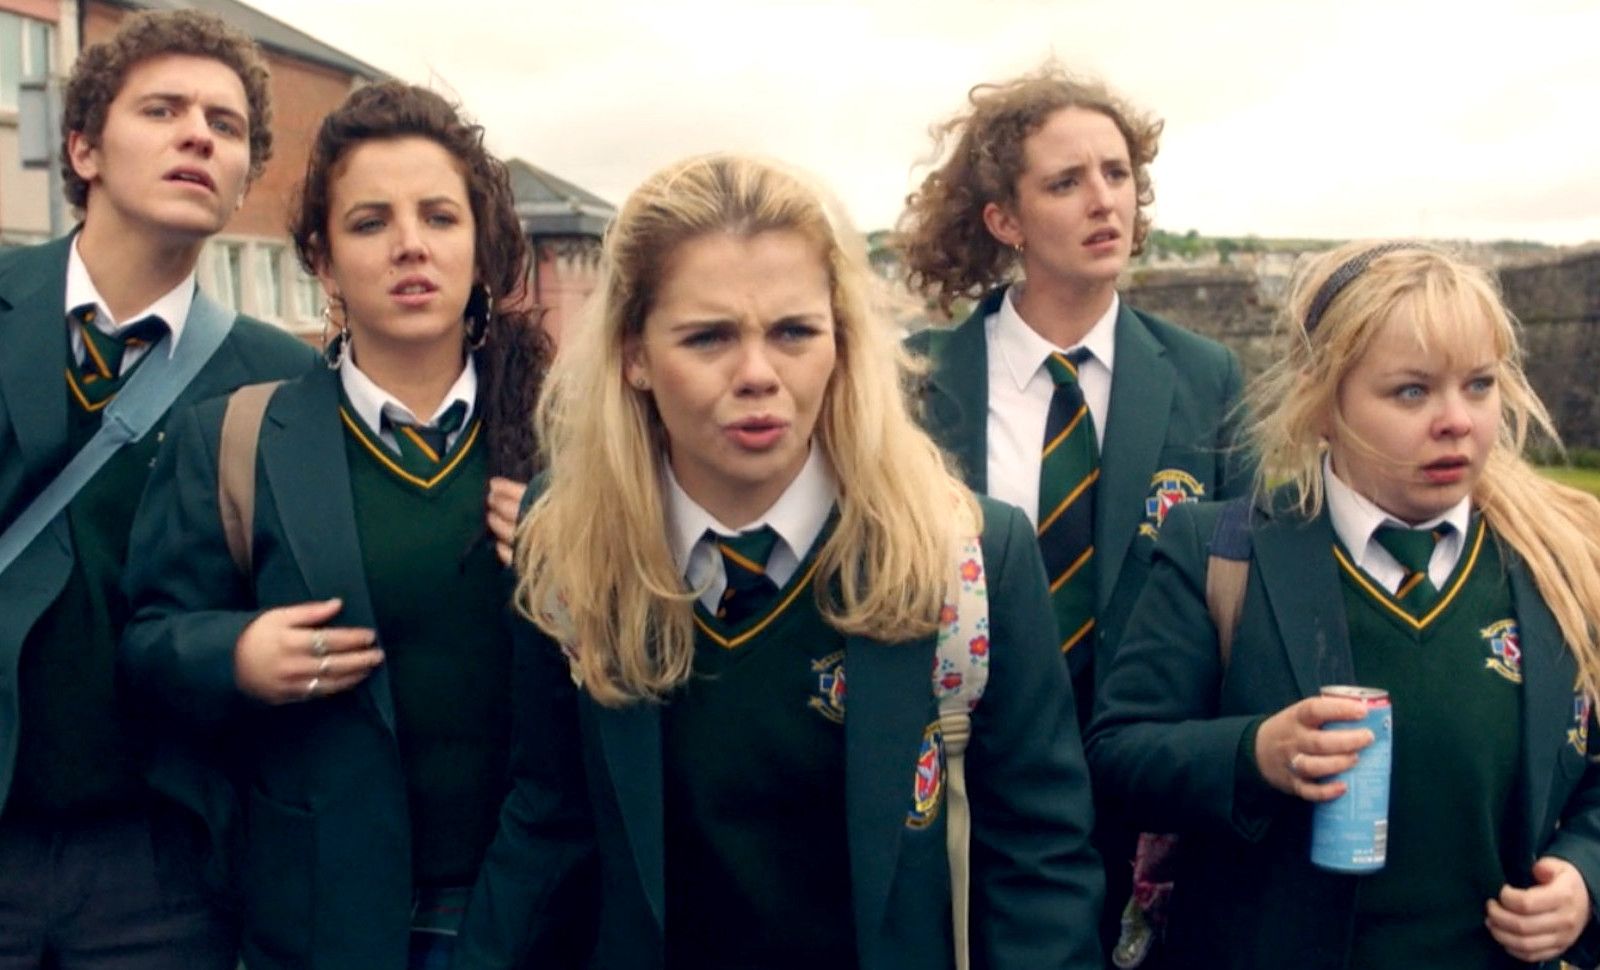 Has Derry Girls Season 3 Spilled the Release Date Yet?